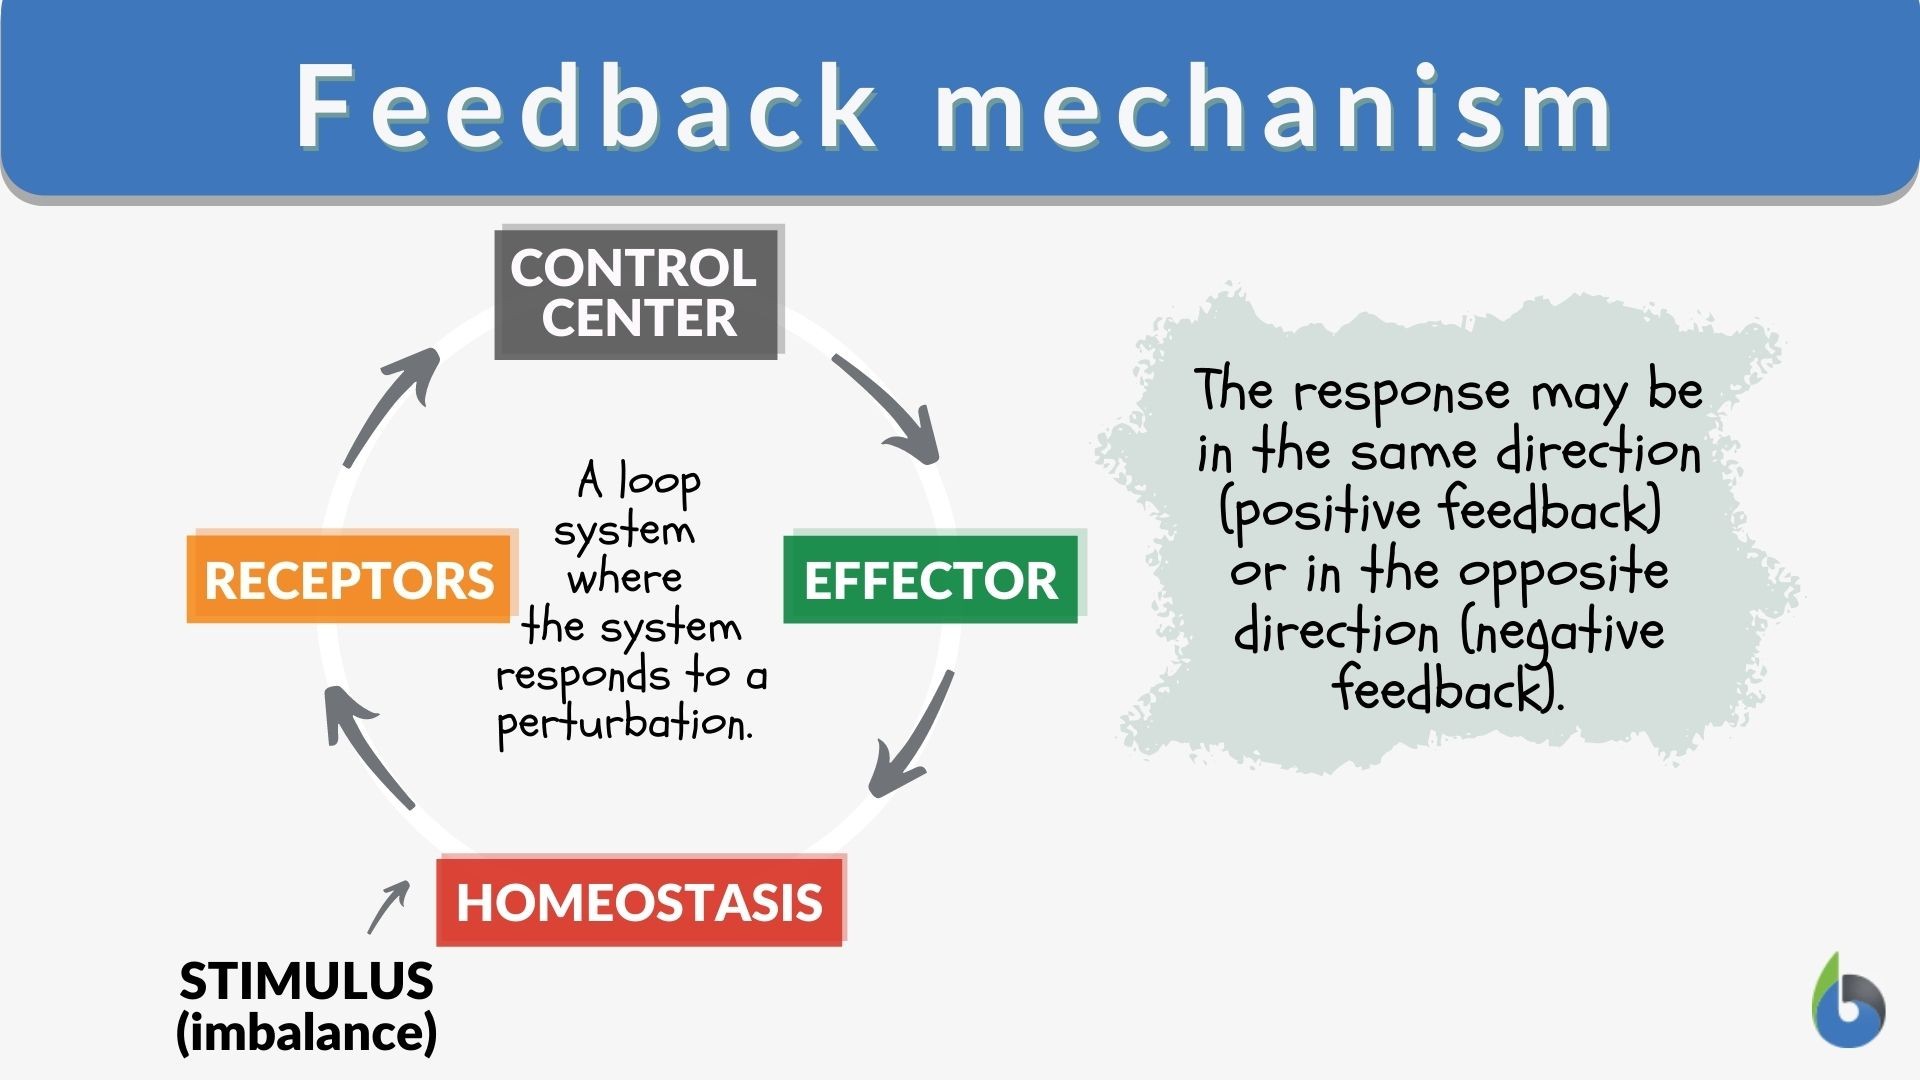 which are examples of negative feedback regulation